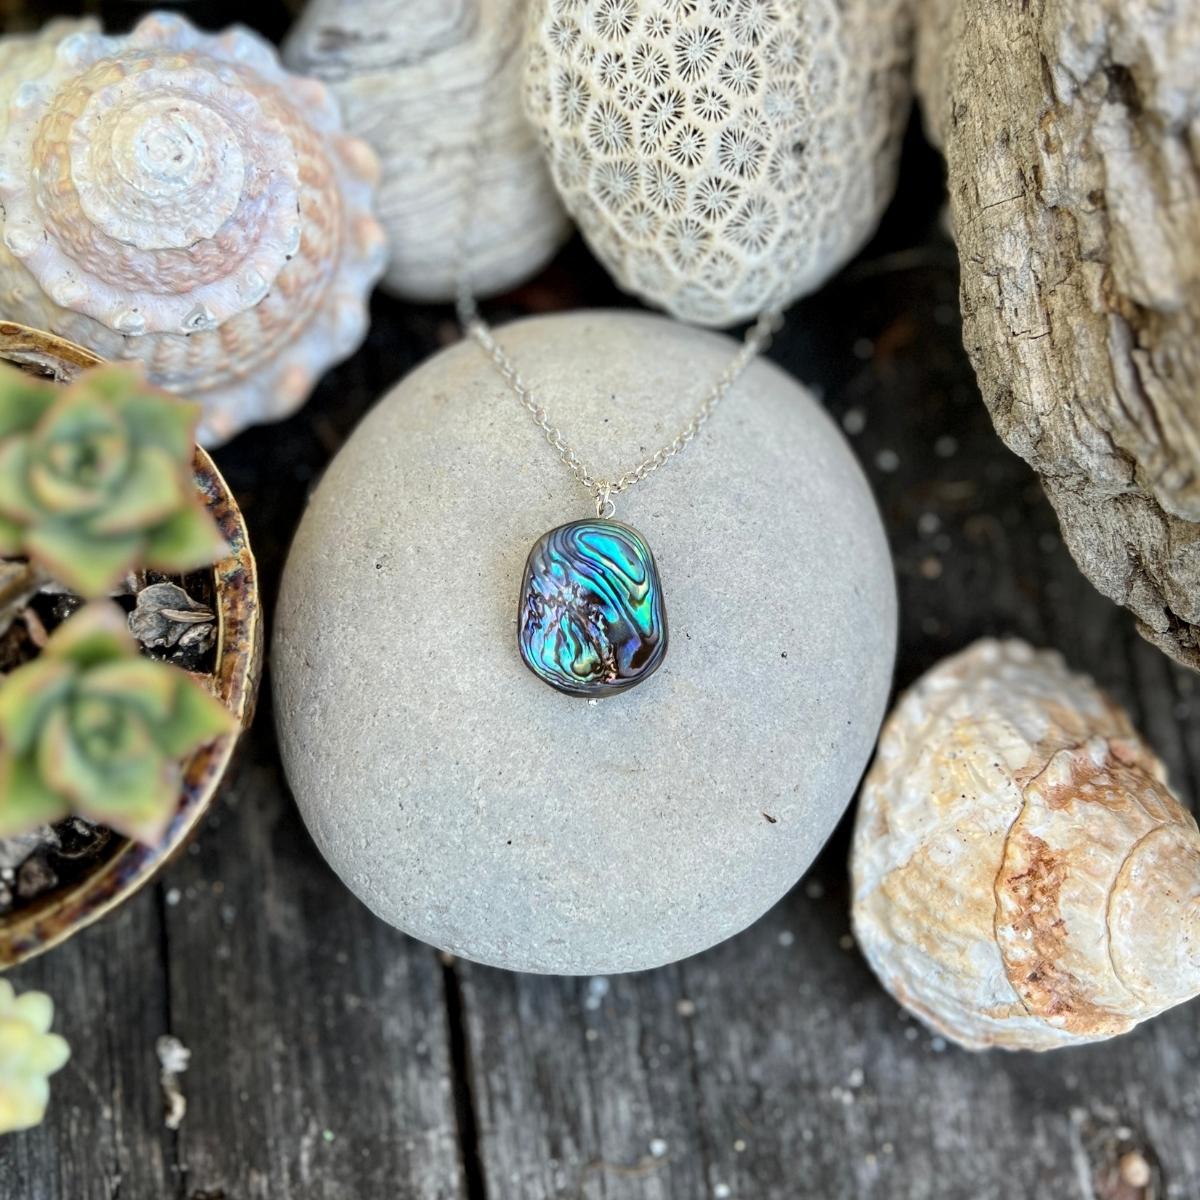 "Coastal Treasures" is a necklace that celebrates the raw and untamed beauty of nature. At its heart, it features a rustic abalone piece, measuring approximately 1 to 1.5 inches, hanging gracefully from a sterling silver chain.